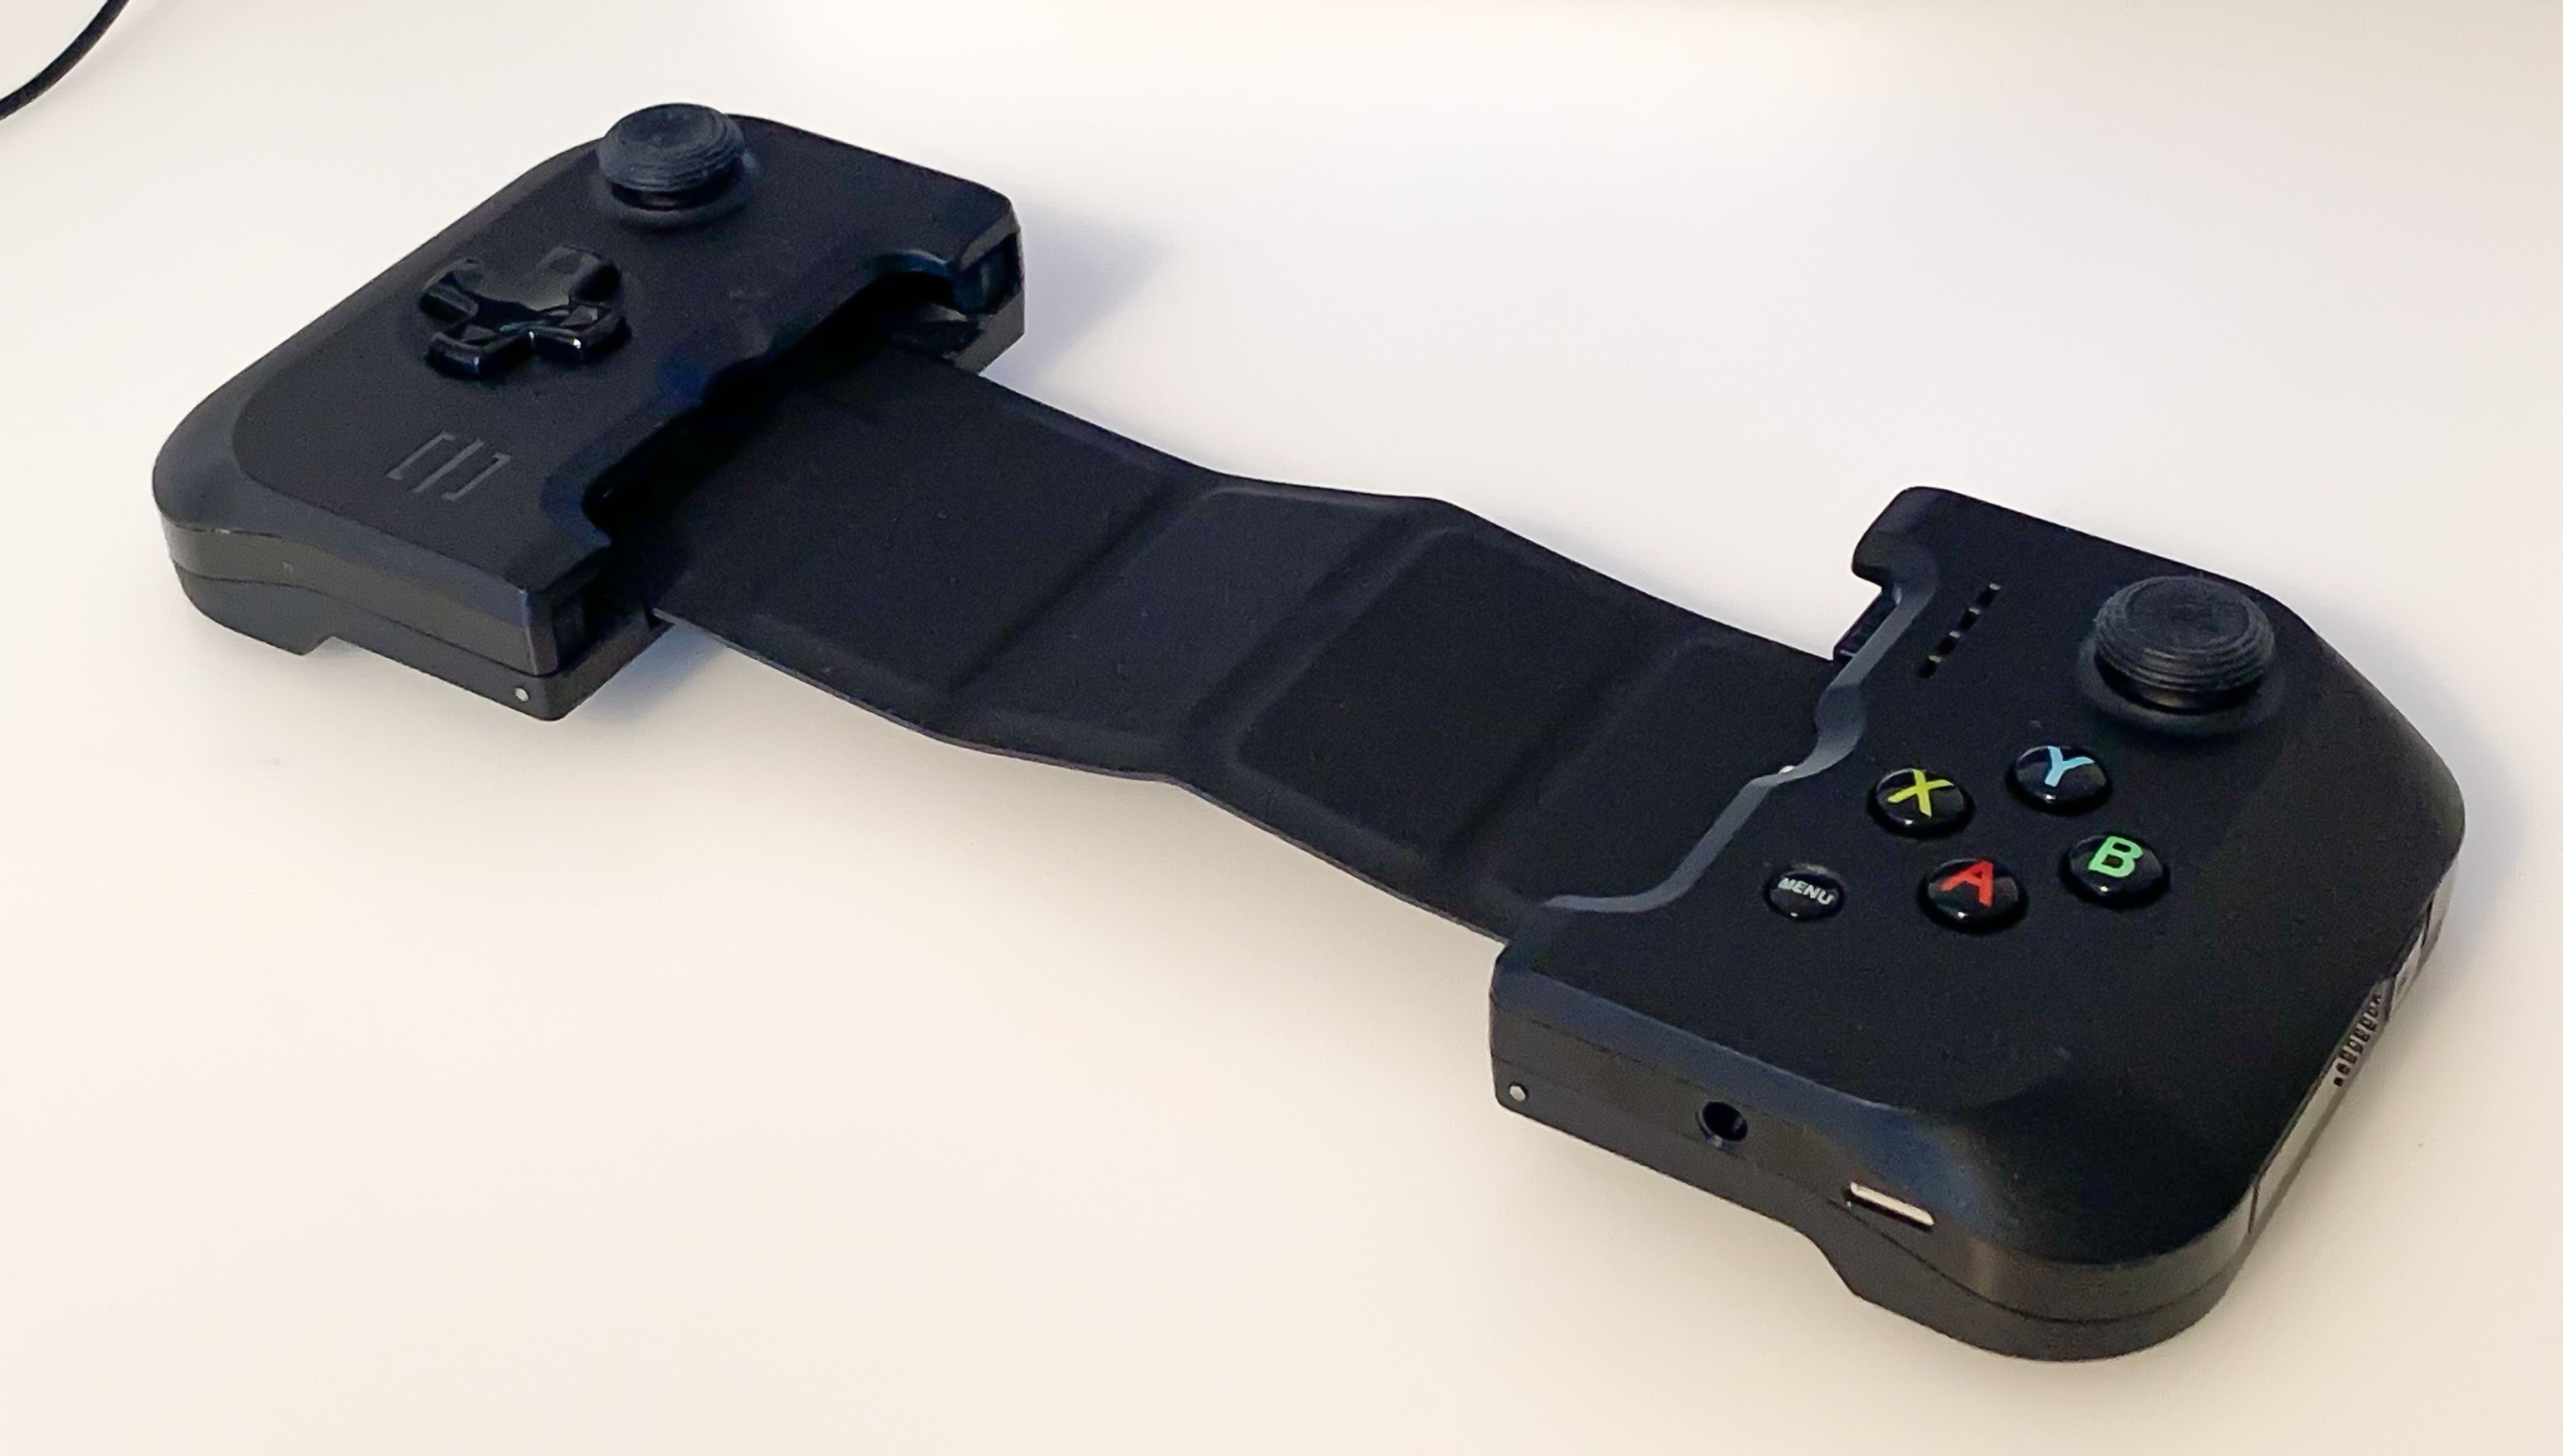 The Gamevice works with almost any iPhone.